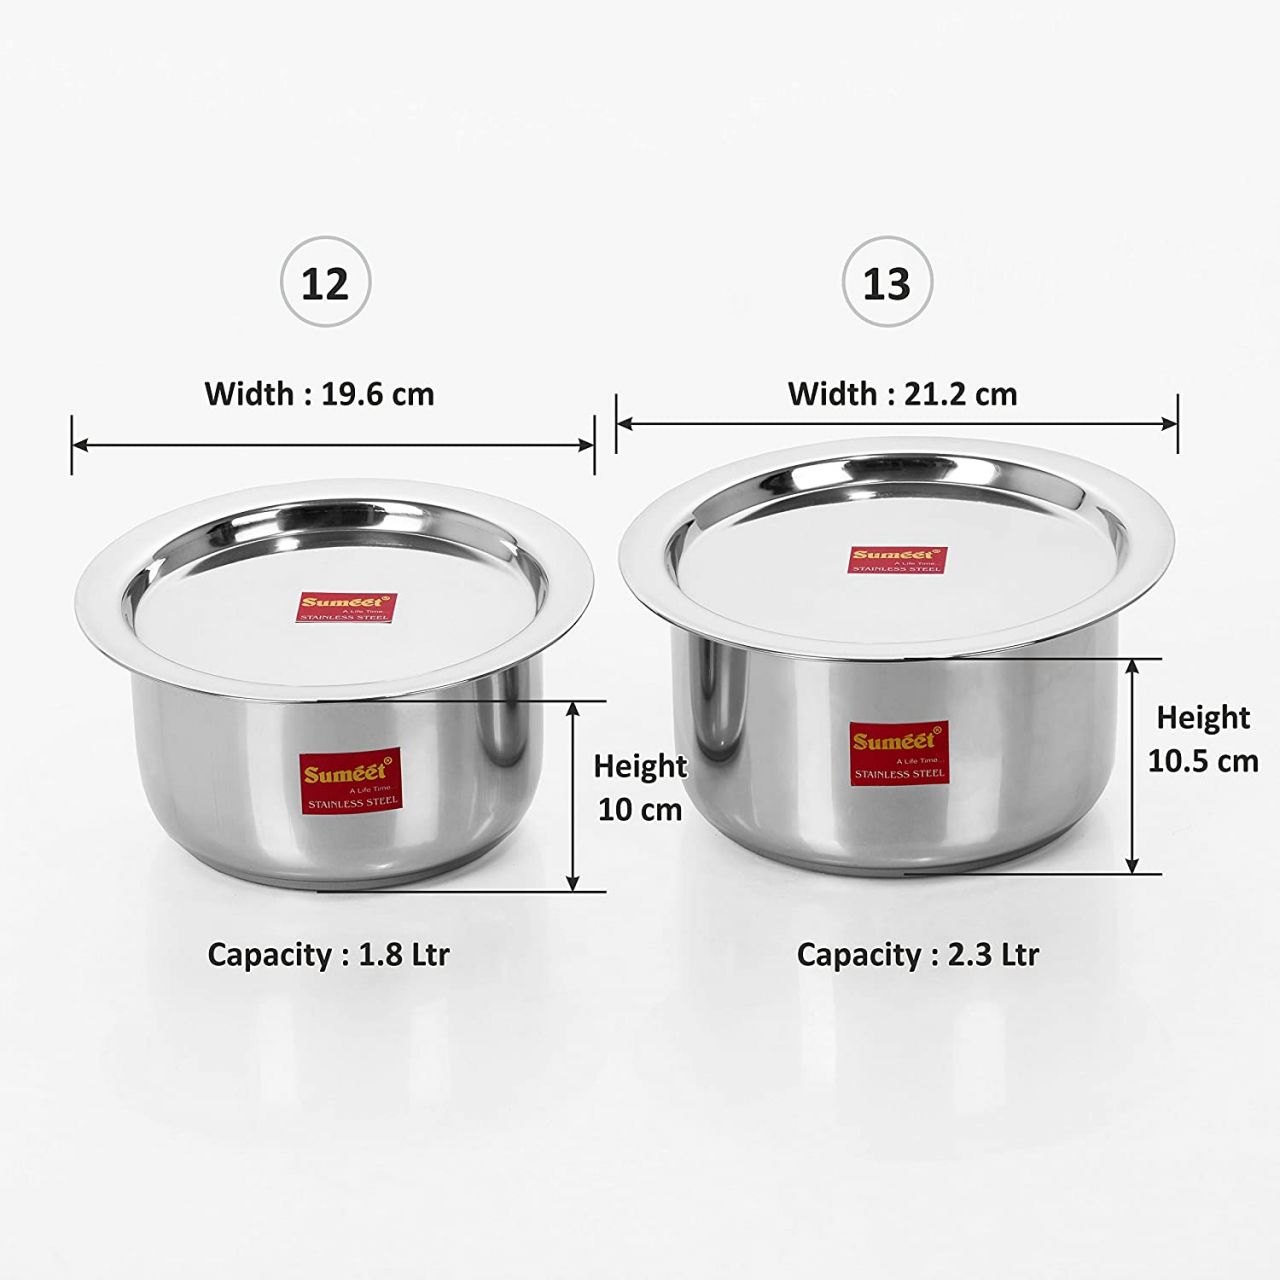 Sumeet Stainless Steel Cookware Set With Lid, 2 Piece (Steel)